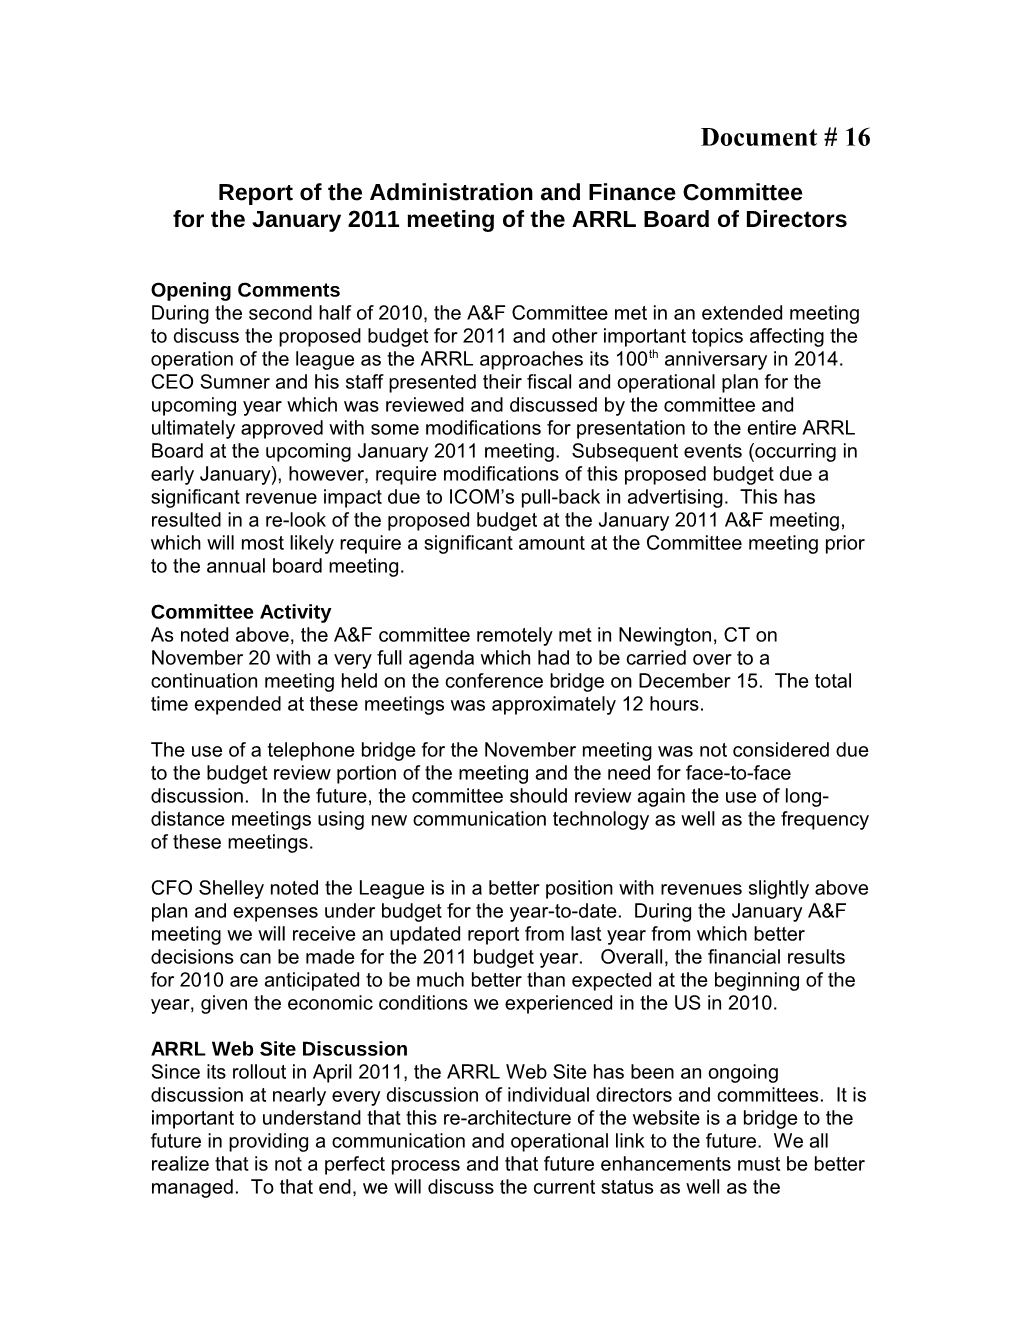 Report of the Administration and Finance Committee